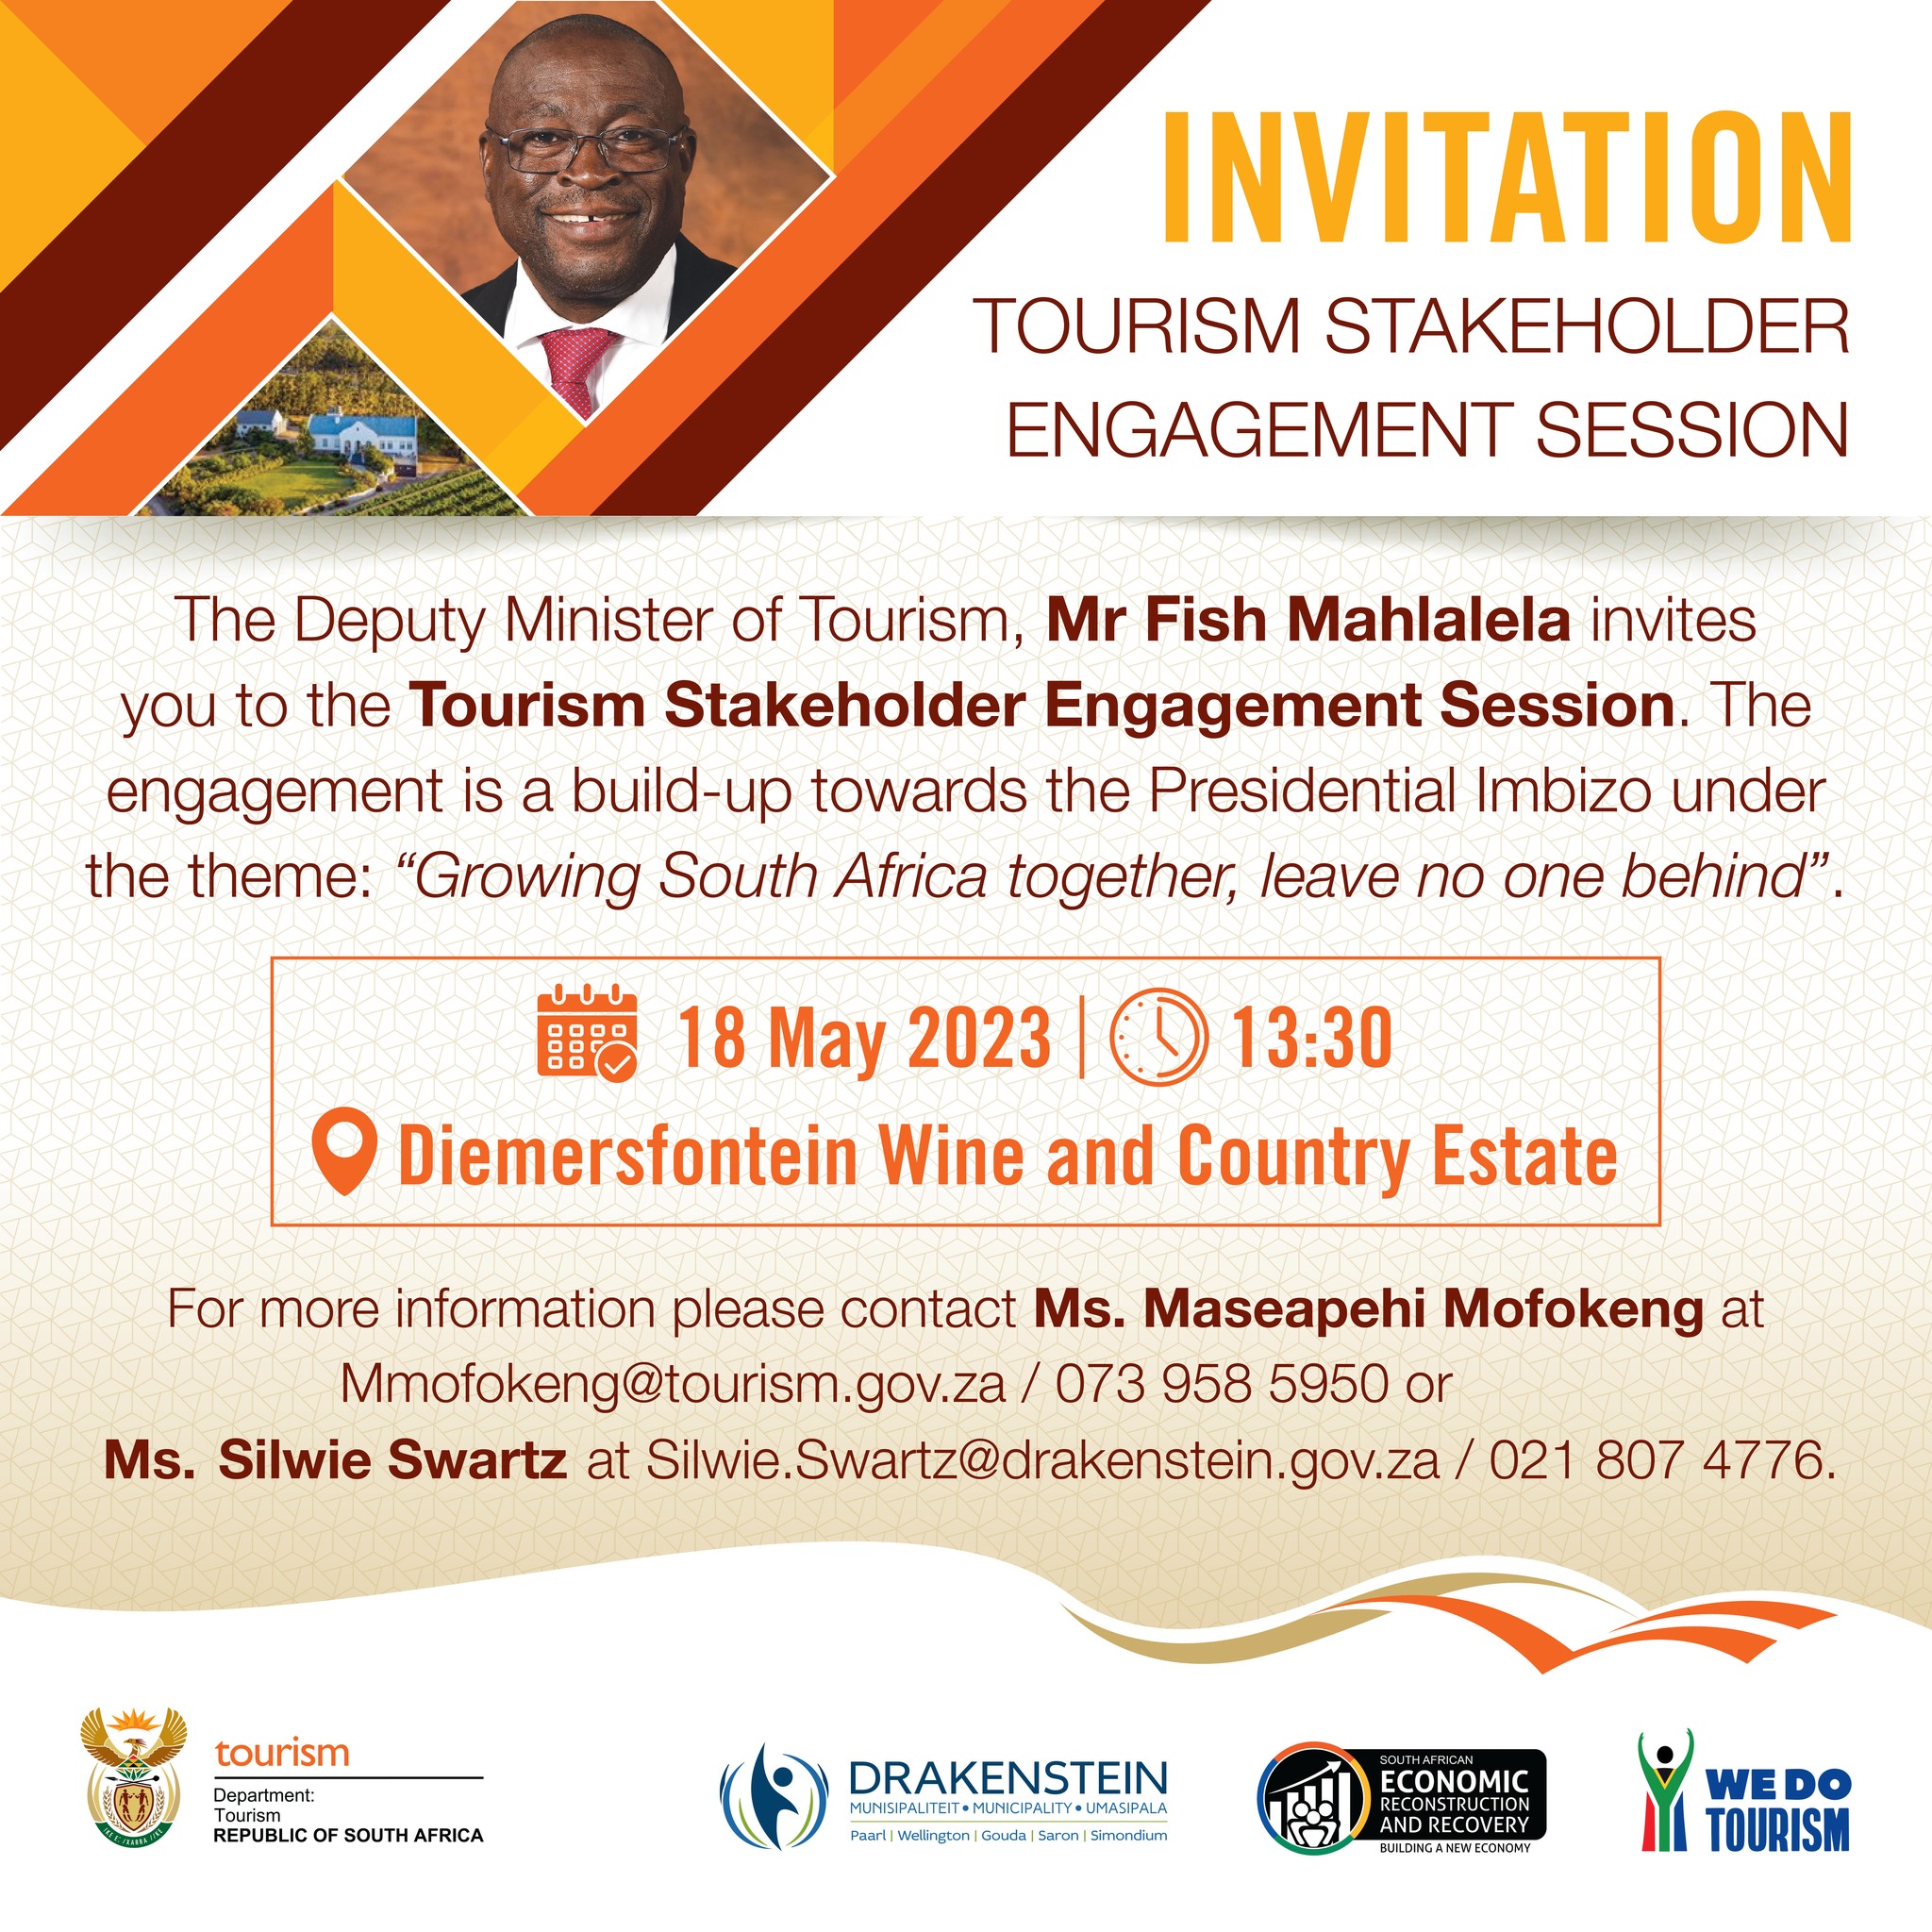 Tourism stakeholder engagement in the Western Cape Province